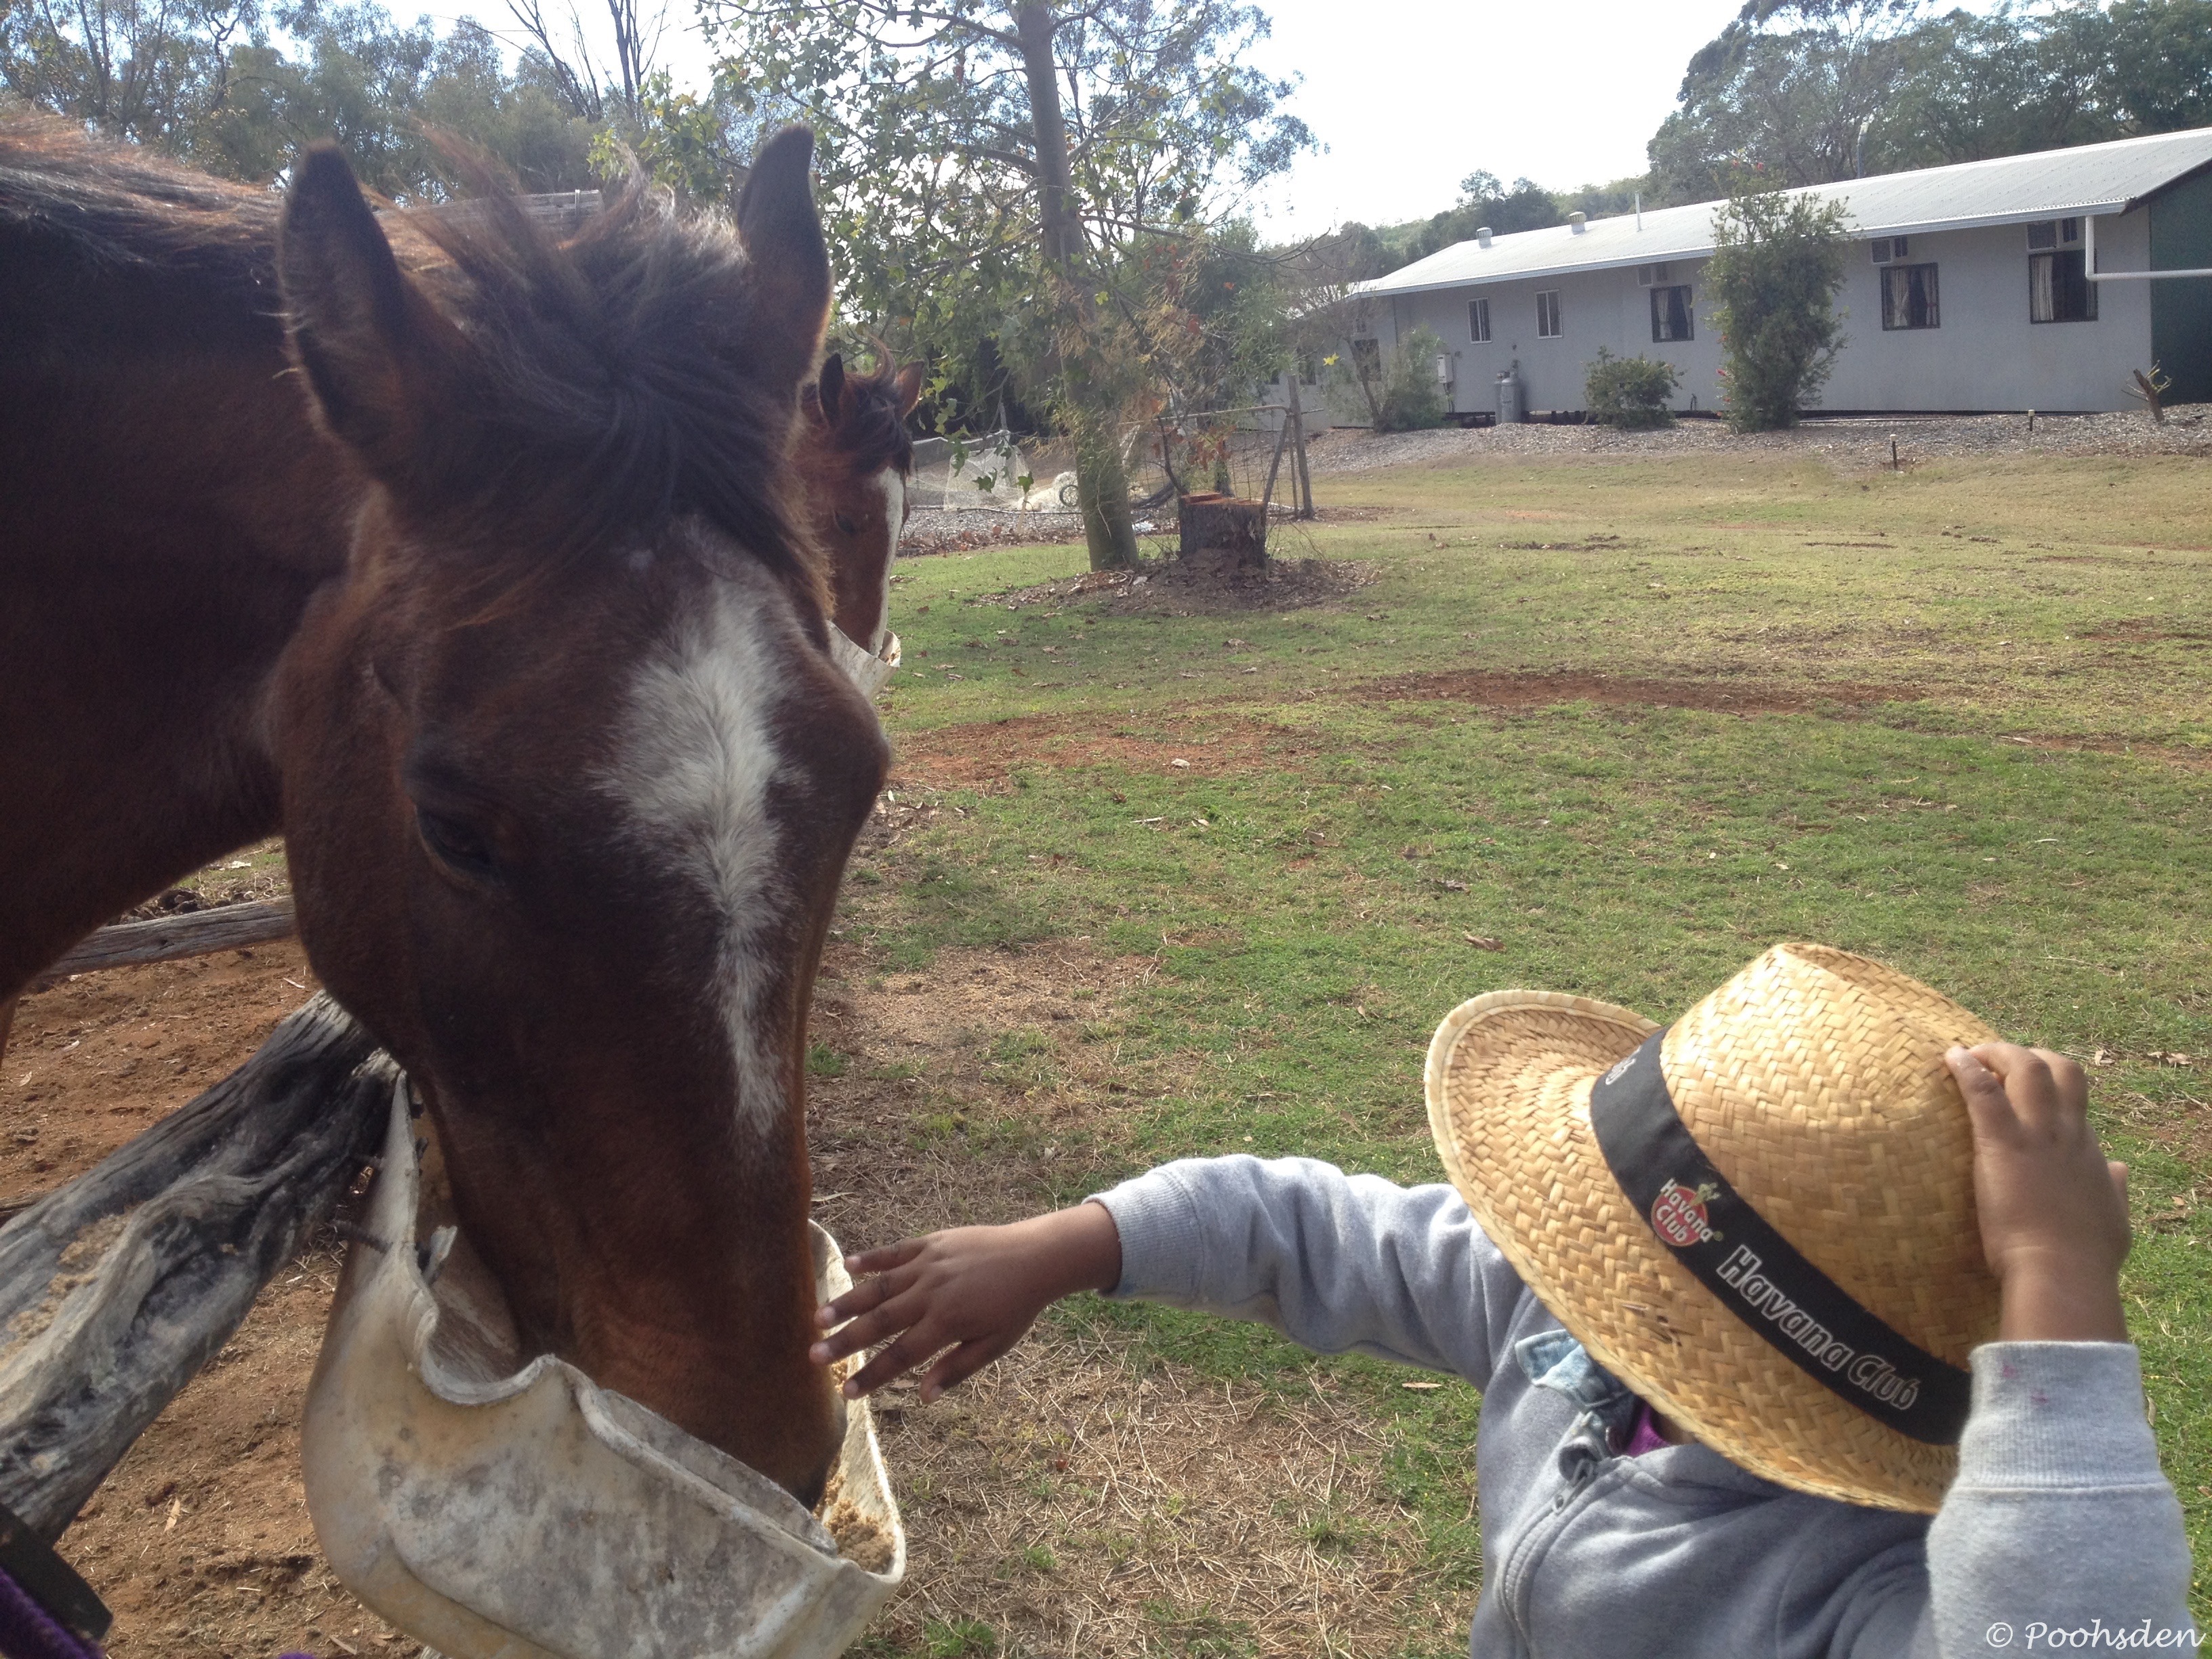 My daughter at a farm in Australia. Her experiences are structured and well-planed unlike my childhood experiences. 